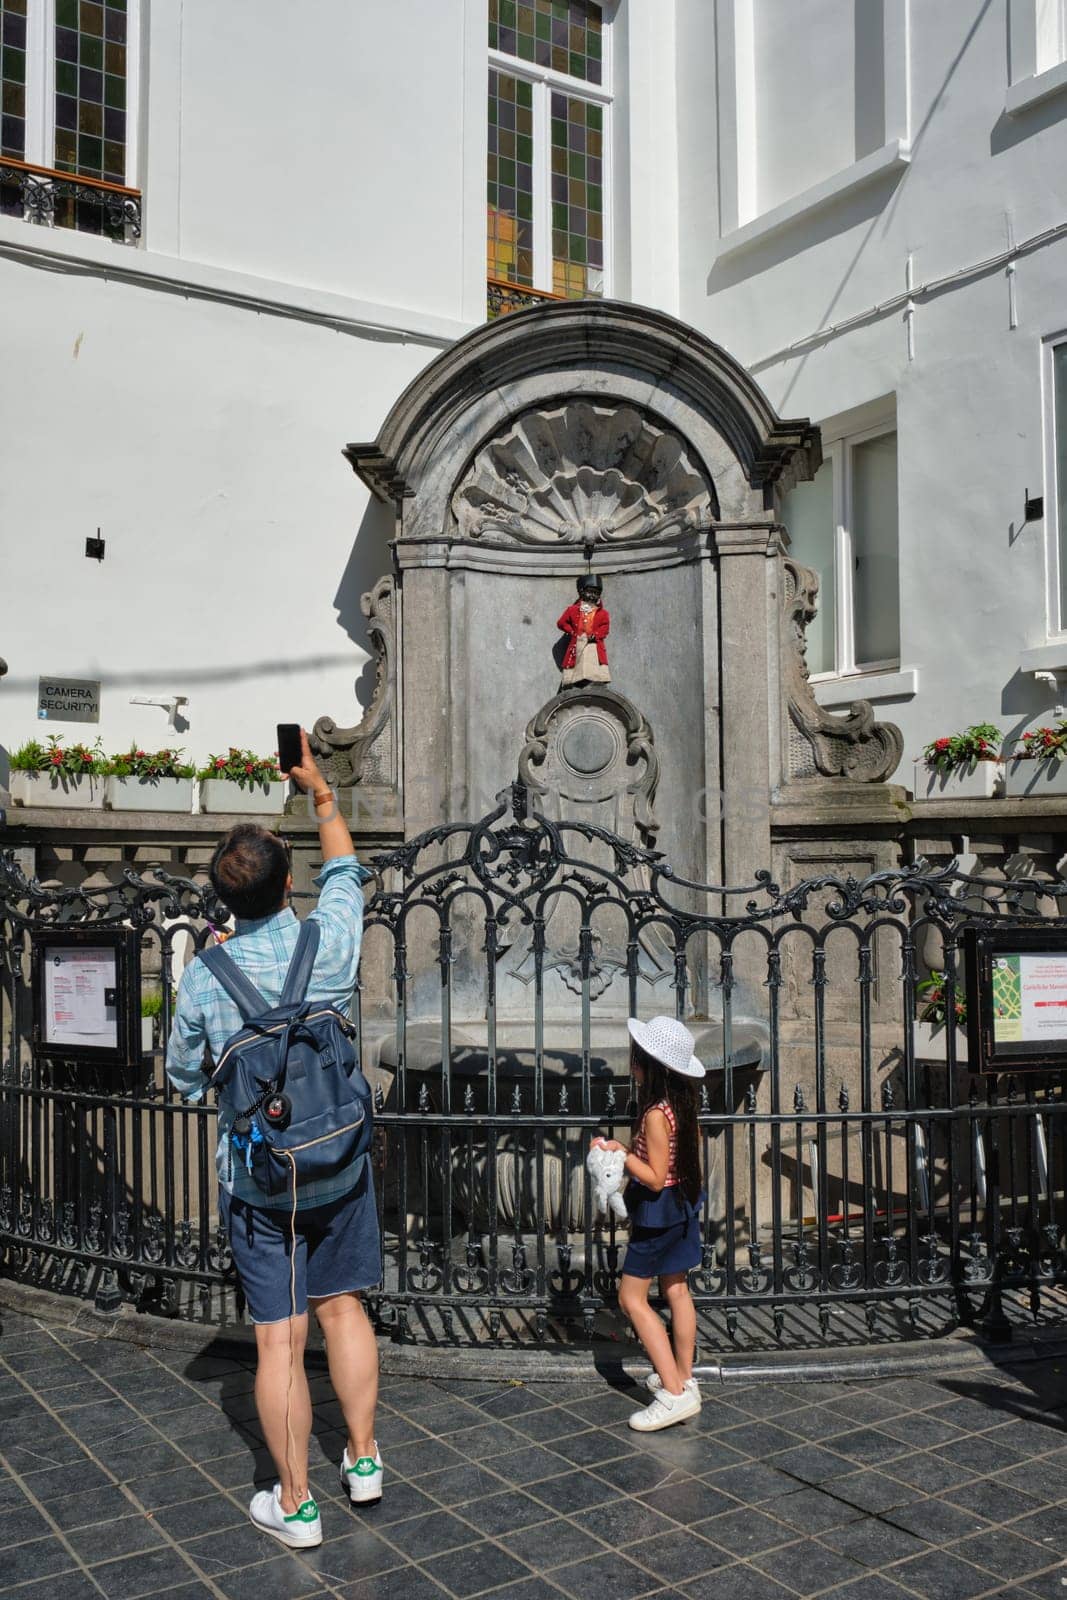 Tourist taking pictures in front of famous tourist attraction of Brussels - Manneken Pis statue by dimol